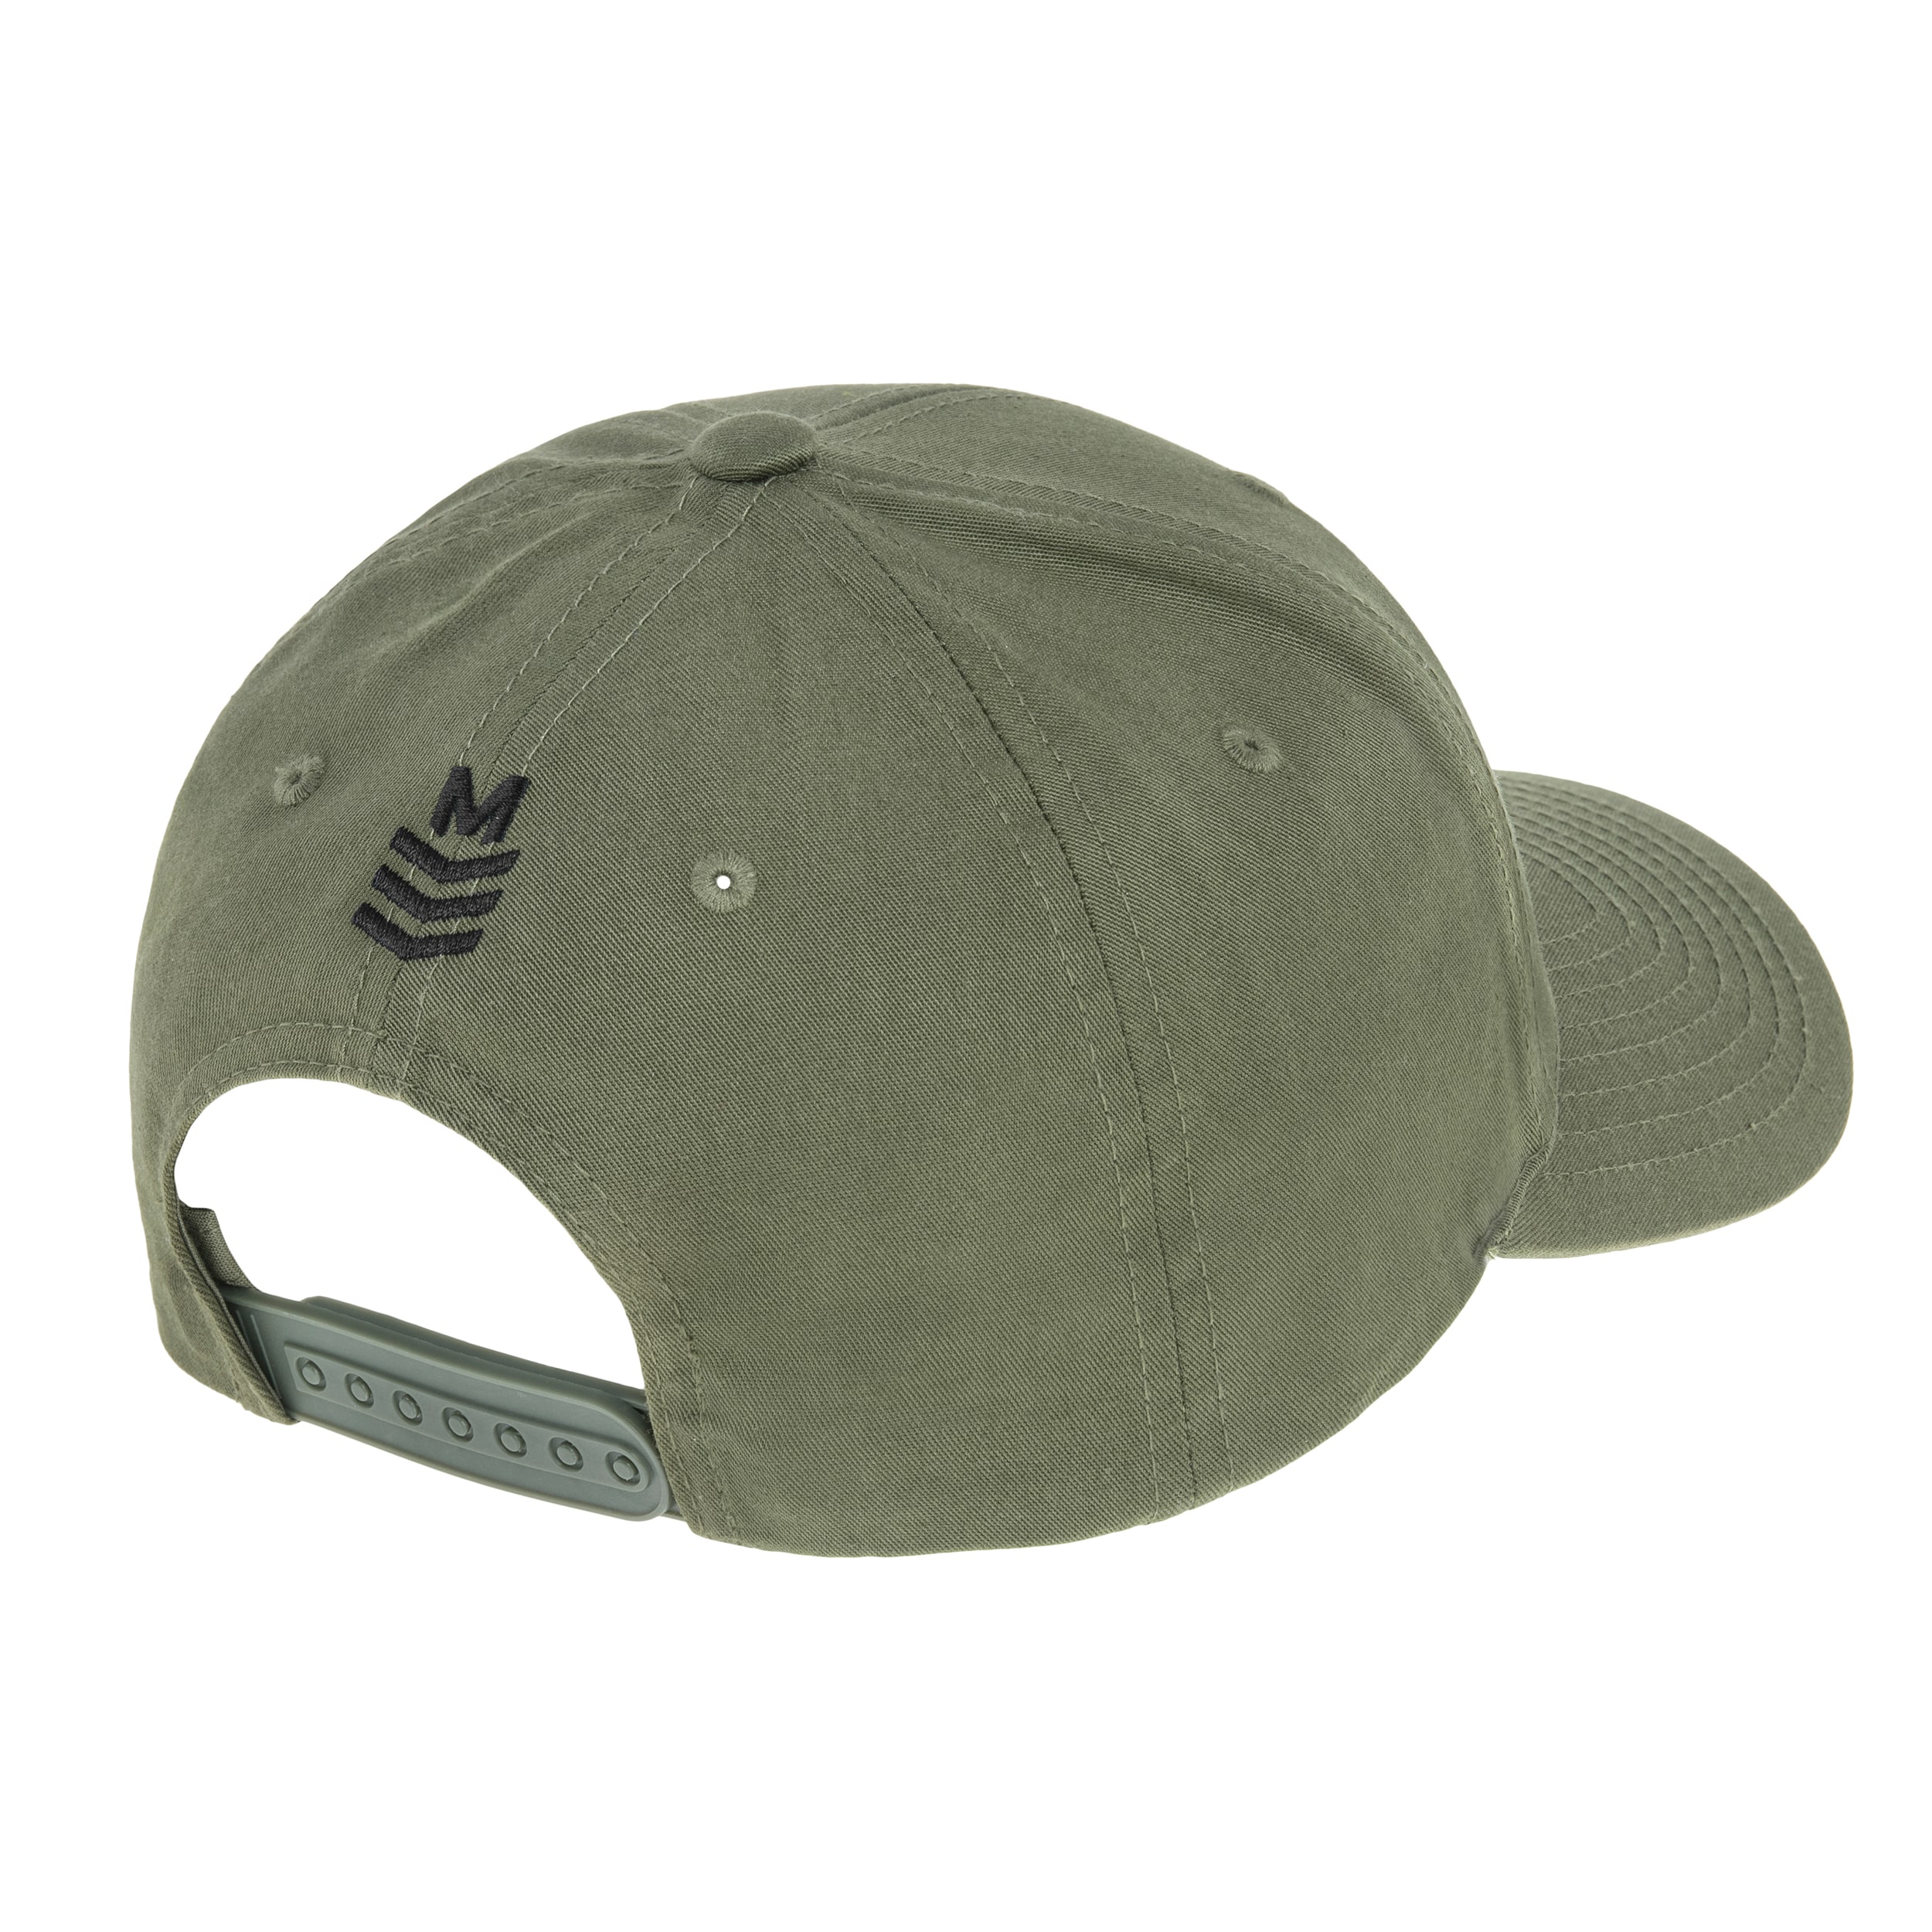 Military Wear - Curved Classic Snapback Basecap - Buck